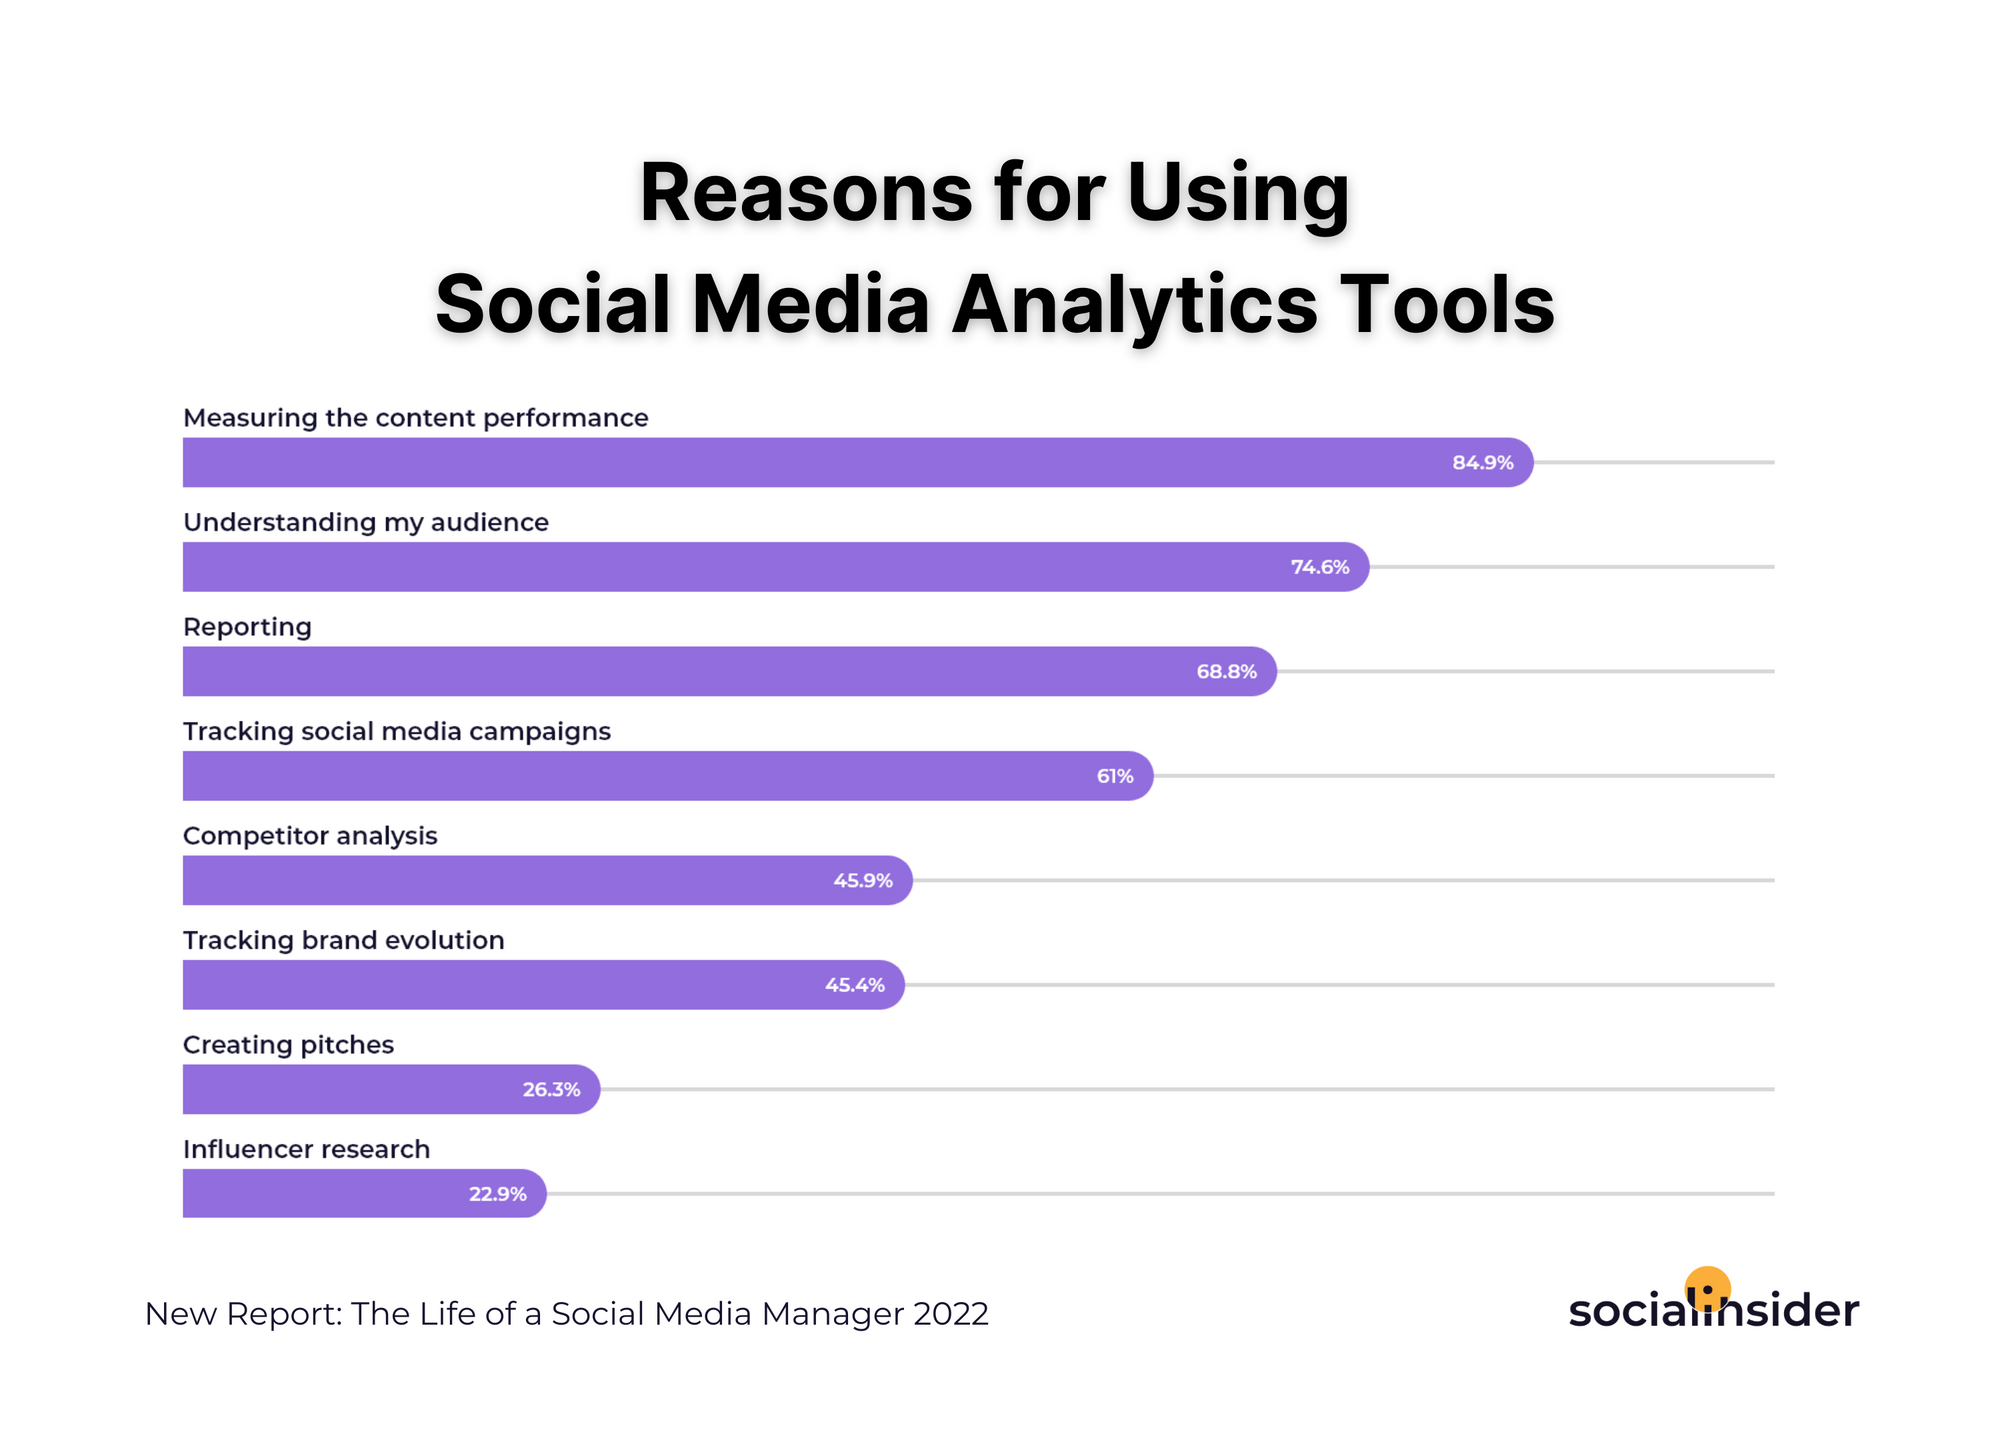 New Report: The Life of a Social Media Manager by Socialinsider